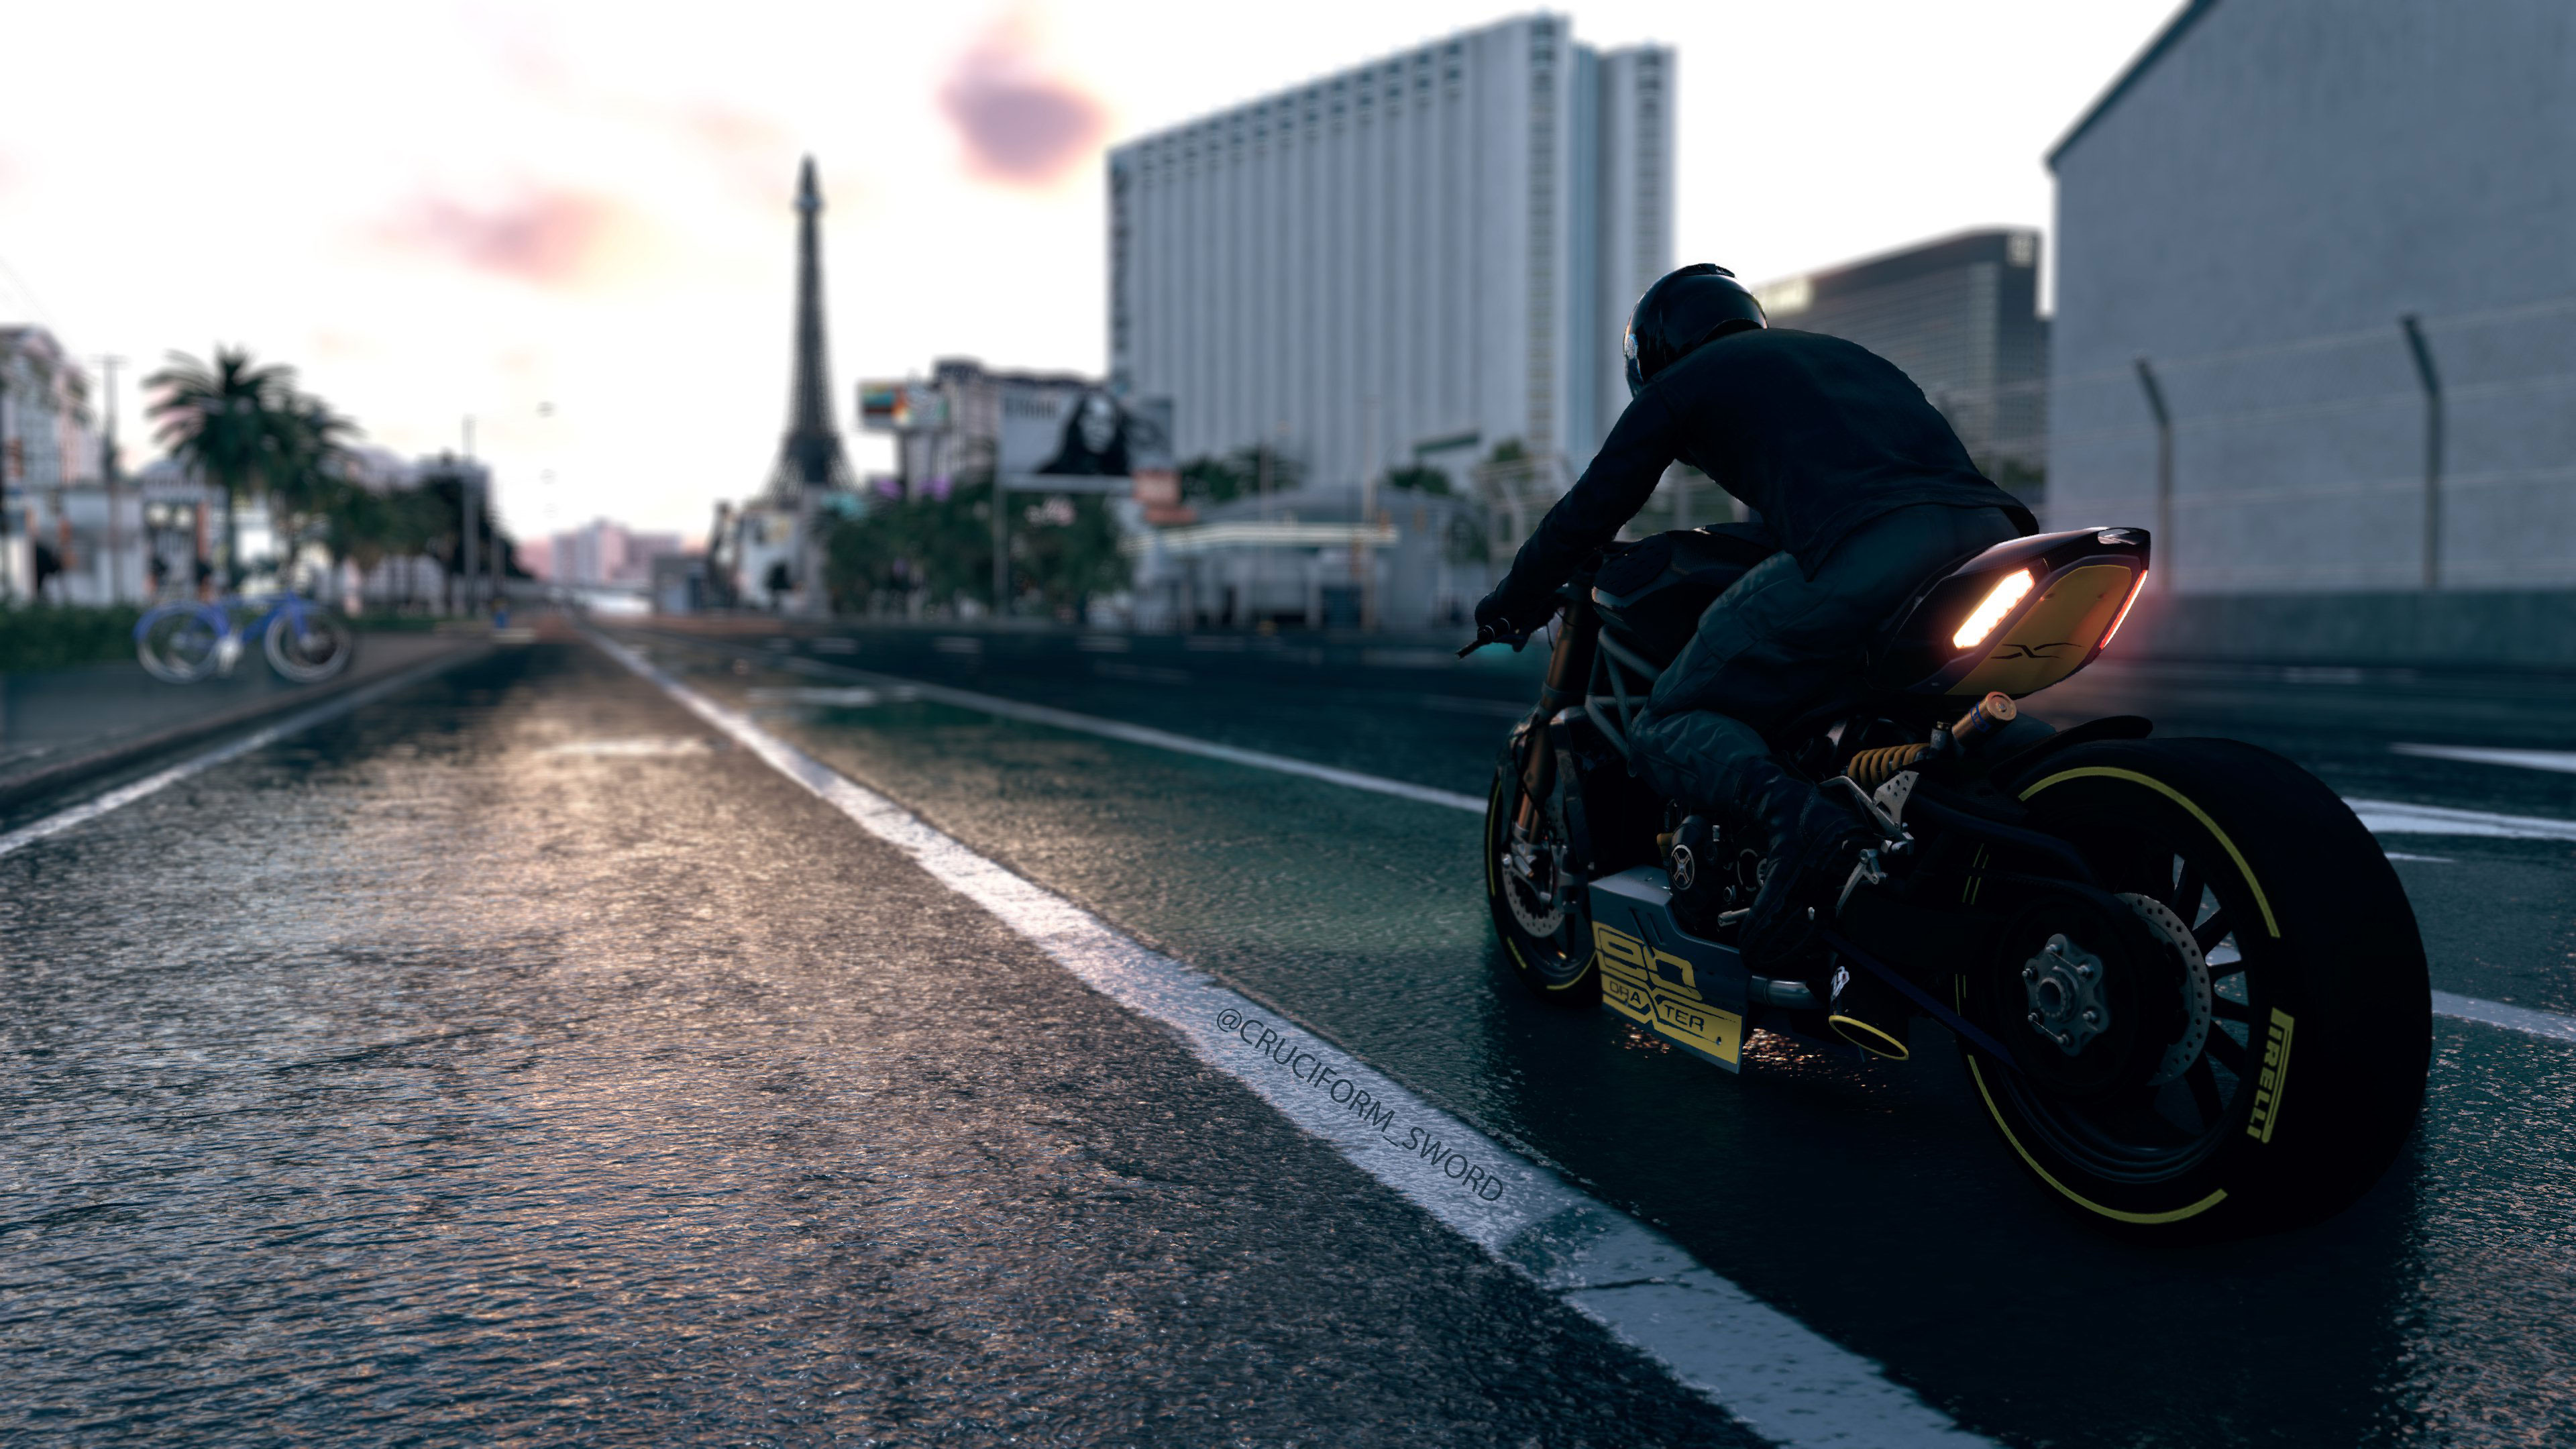 Ducati Superbike The Crew 2 Video Games Game Poster Photography Gamewallpapers Bikes Screen Shot In  3840x2160